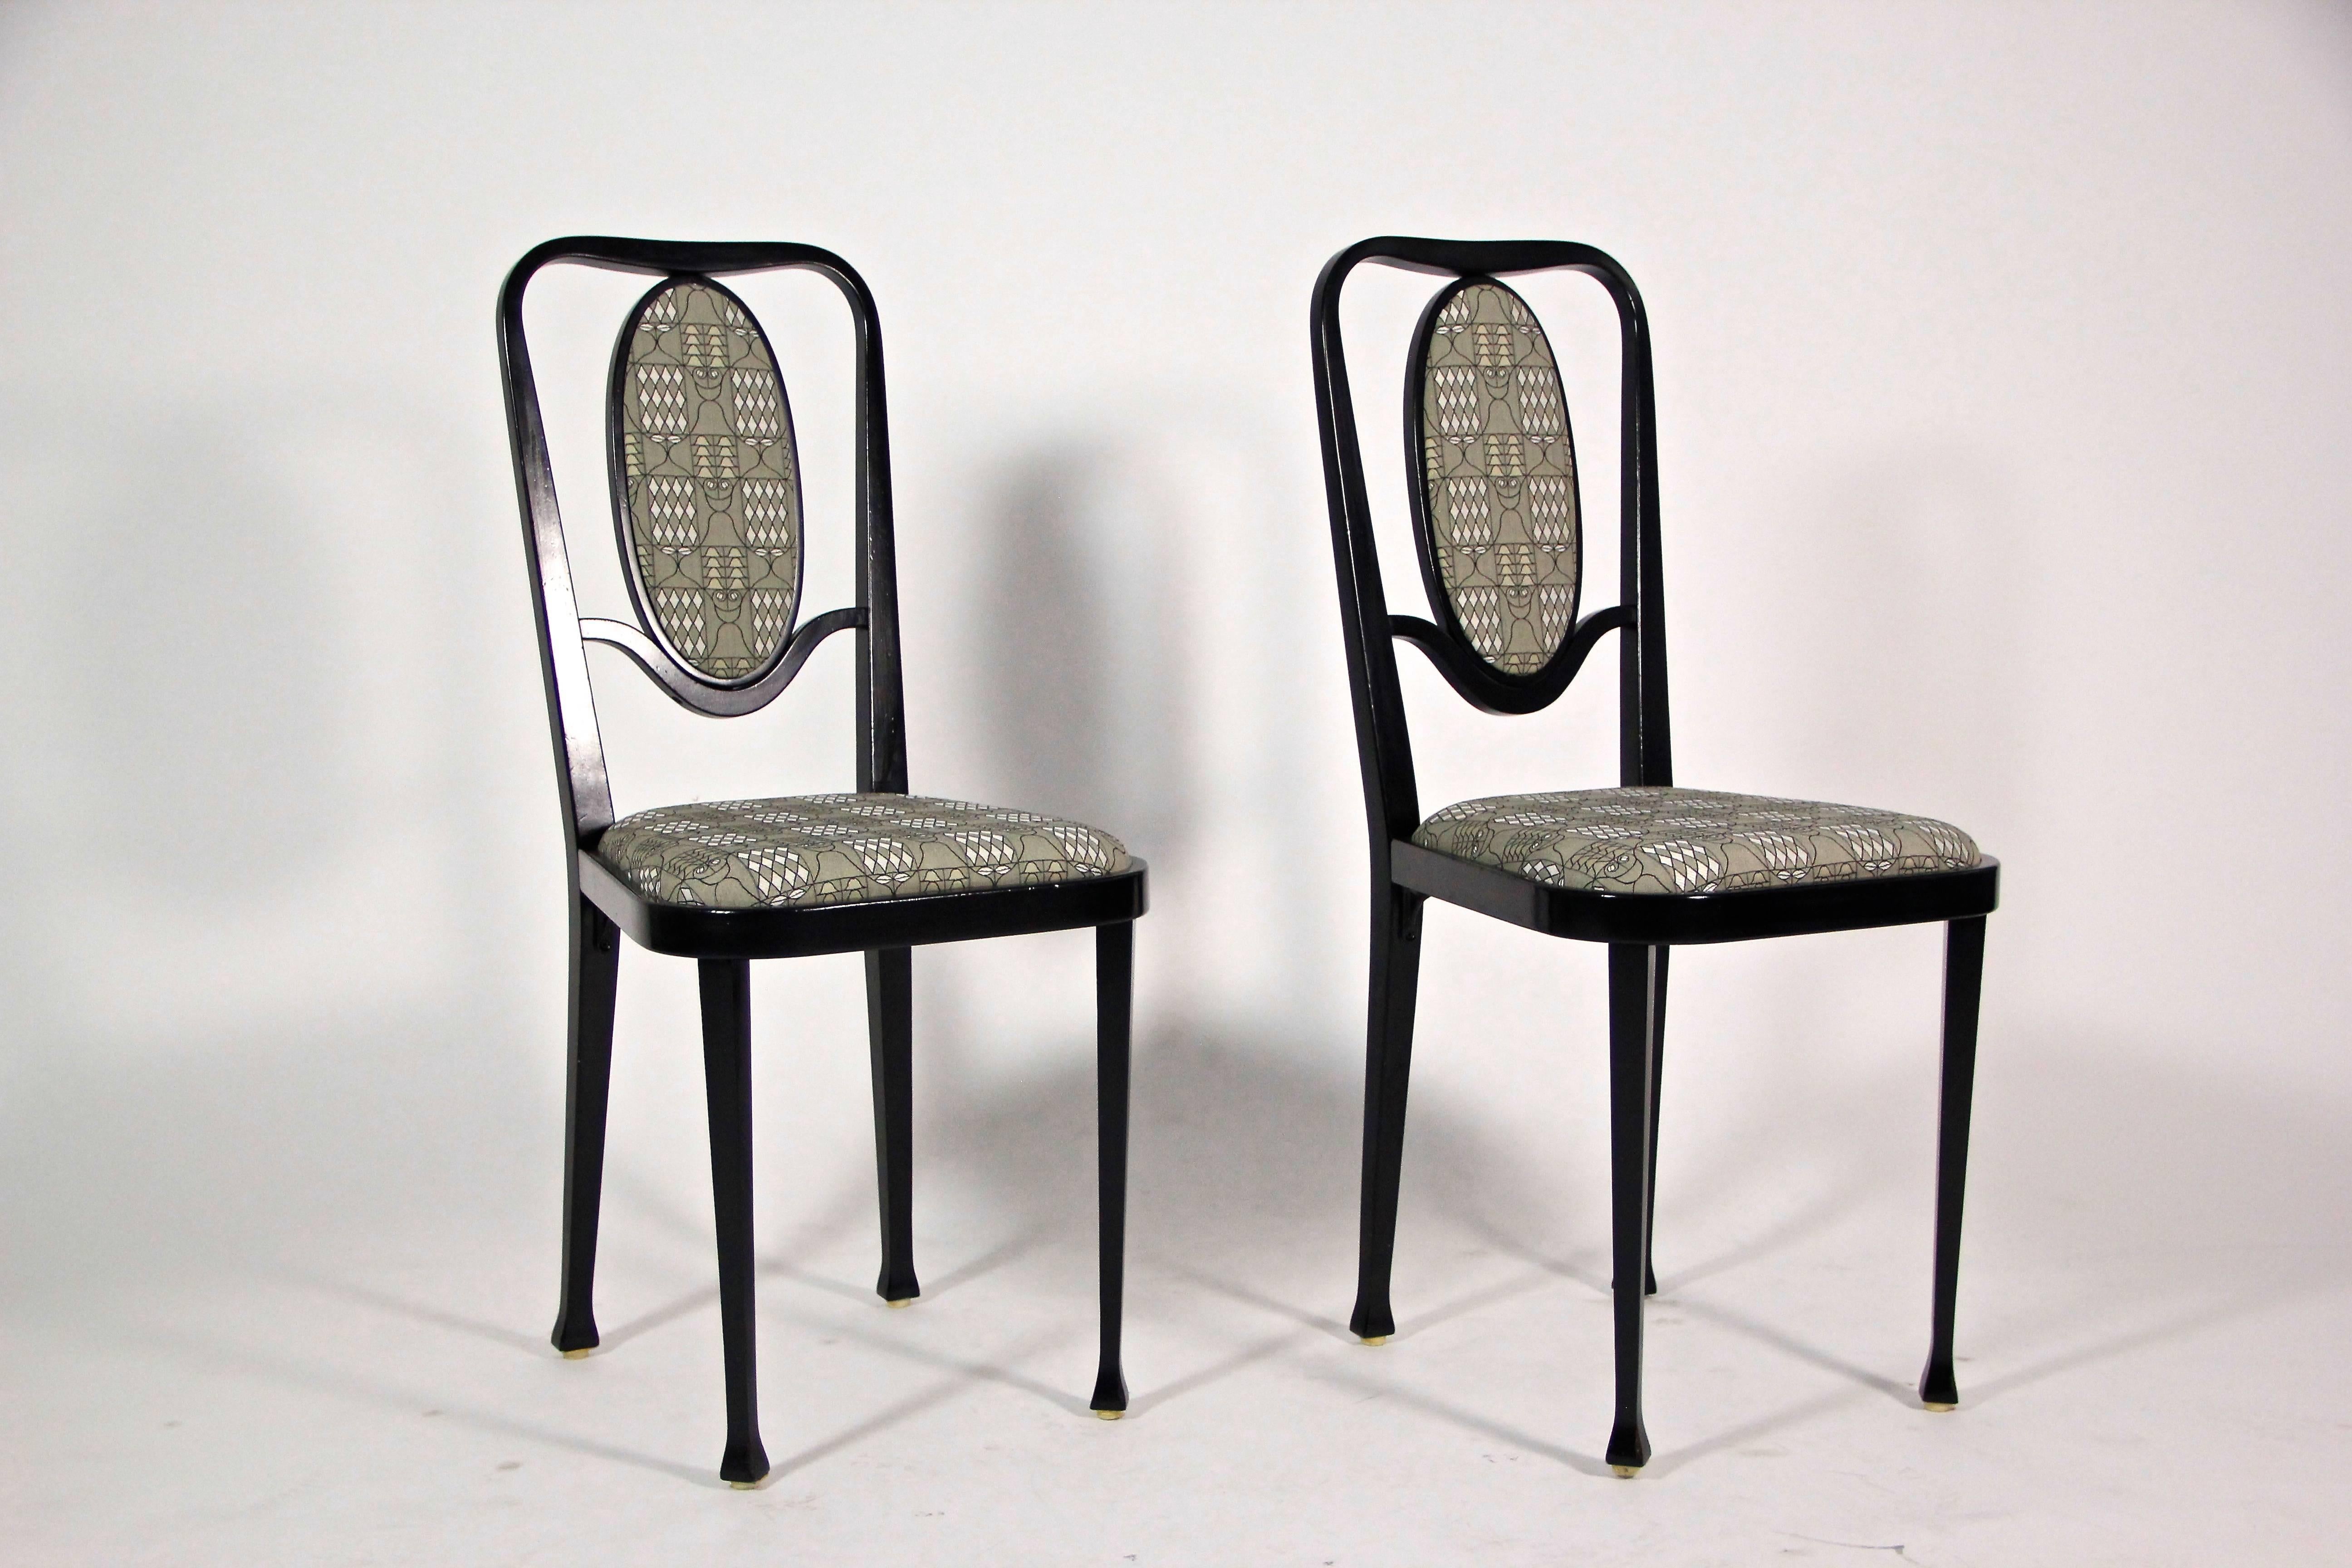 Beech Art Nouveau Style Seating Group by Thonet, Vienna circa 1980